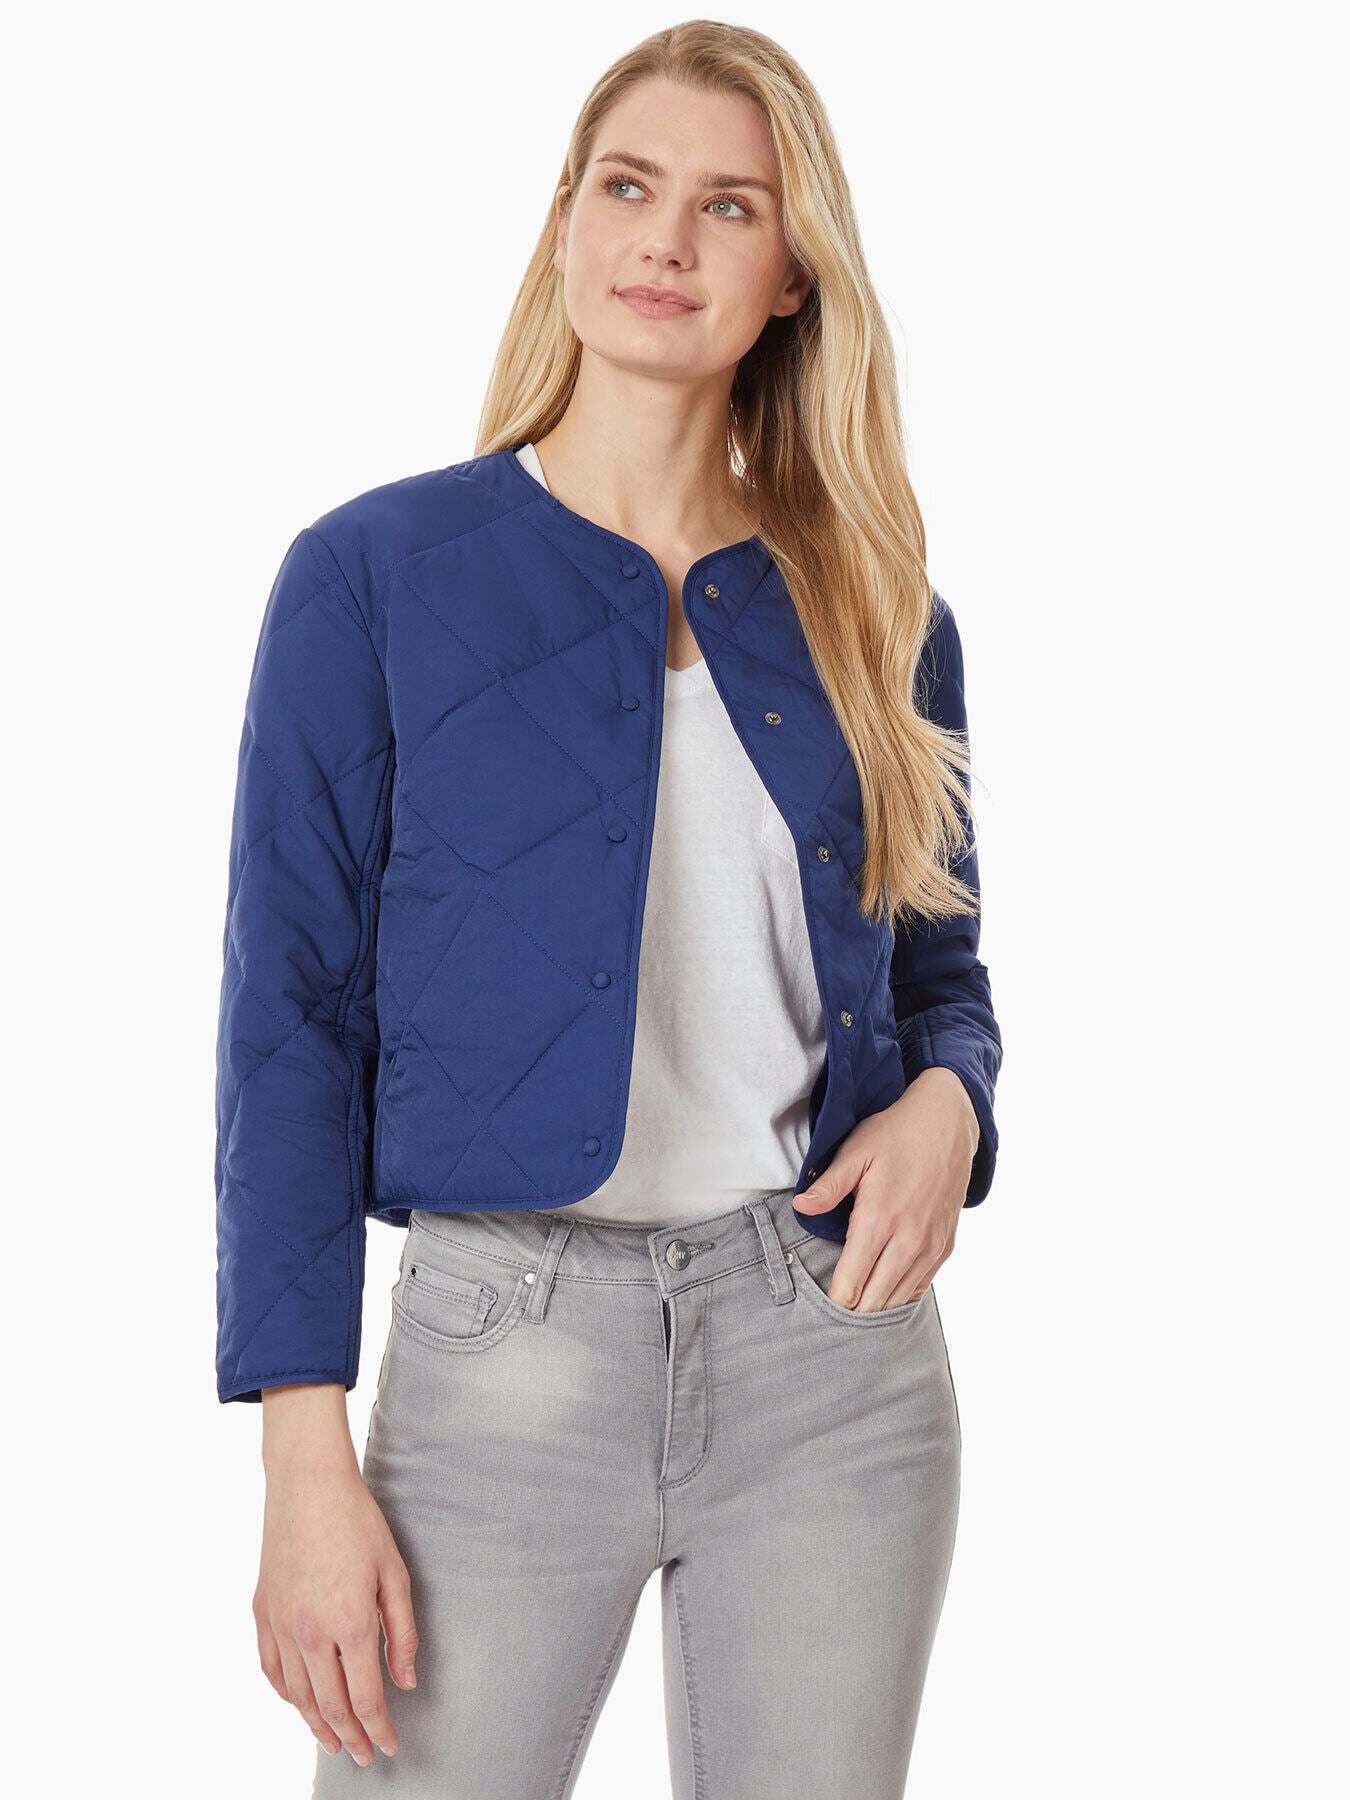 New Quilted Jacket Blue Collarless York Jones | - Jacket Quilted